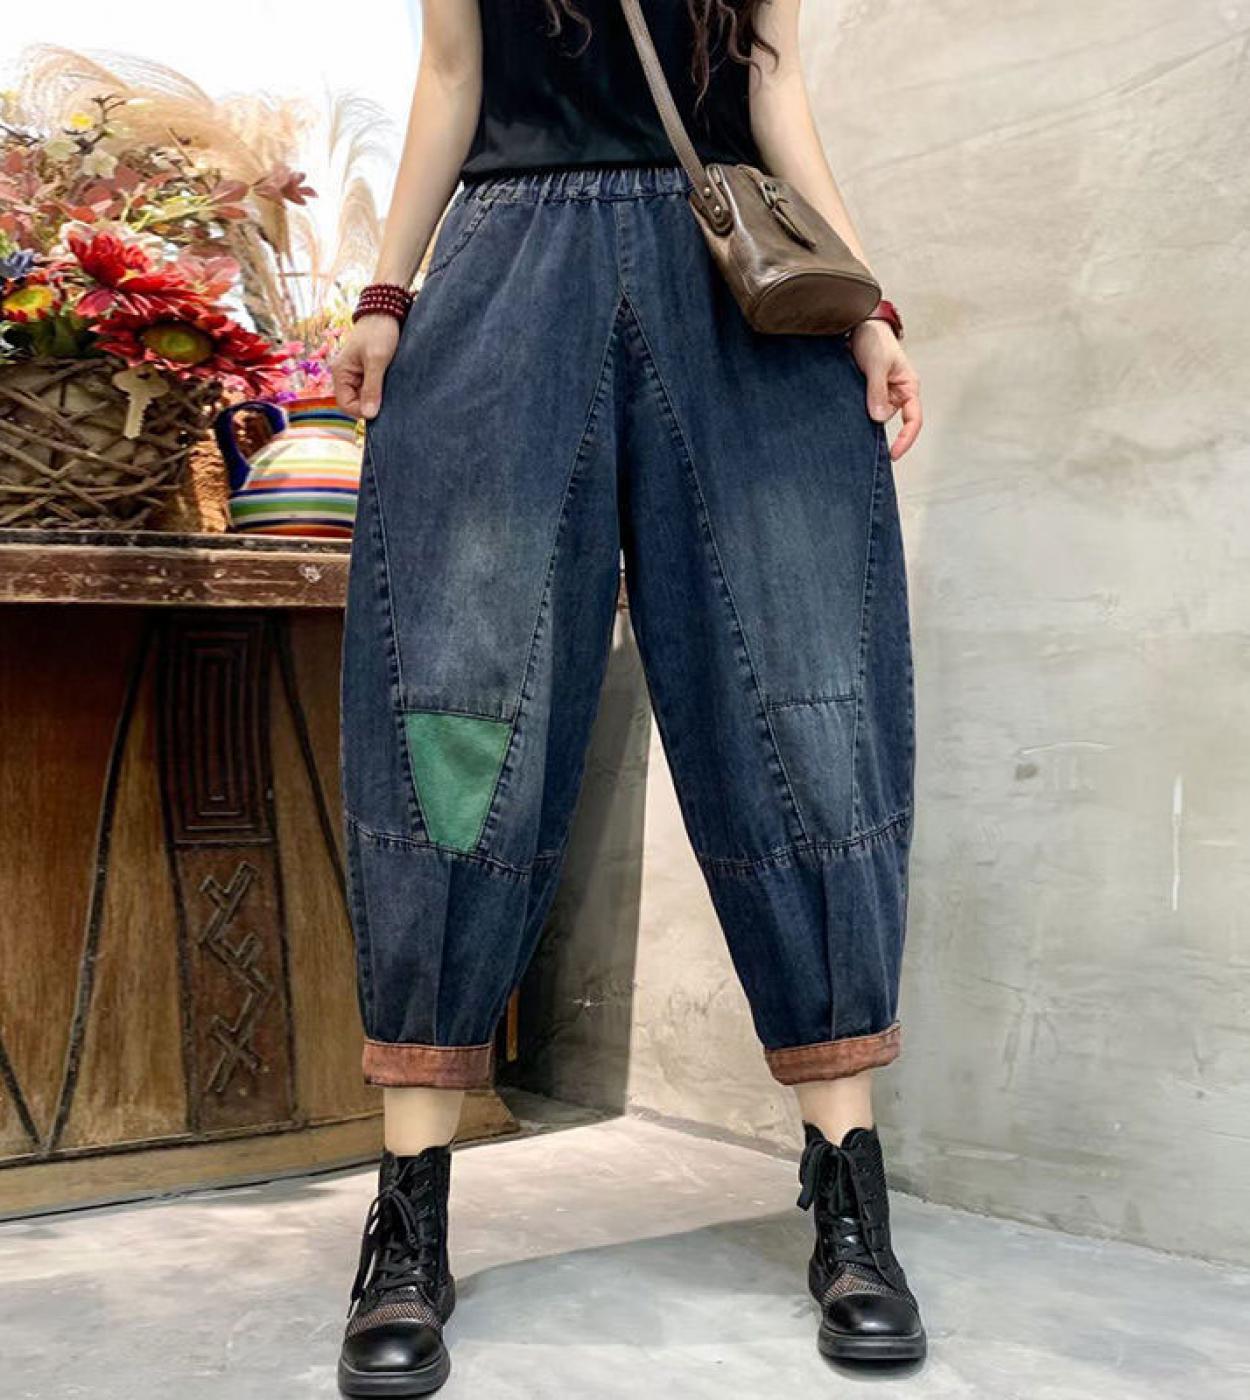  Summer New Arts Style Women Elastic Waist Loose Vintage Jeans All Matched Casual Cotton Denim Harem Pants High Quality 